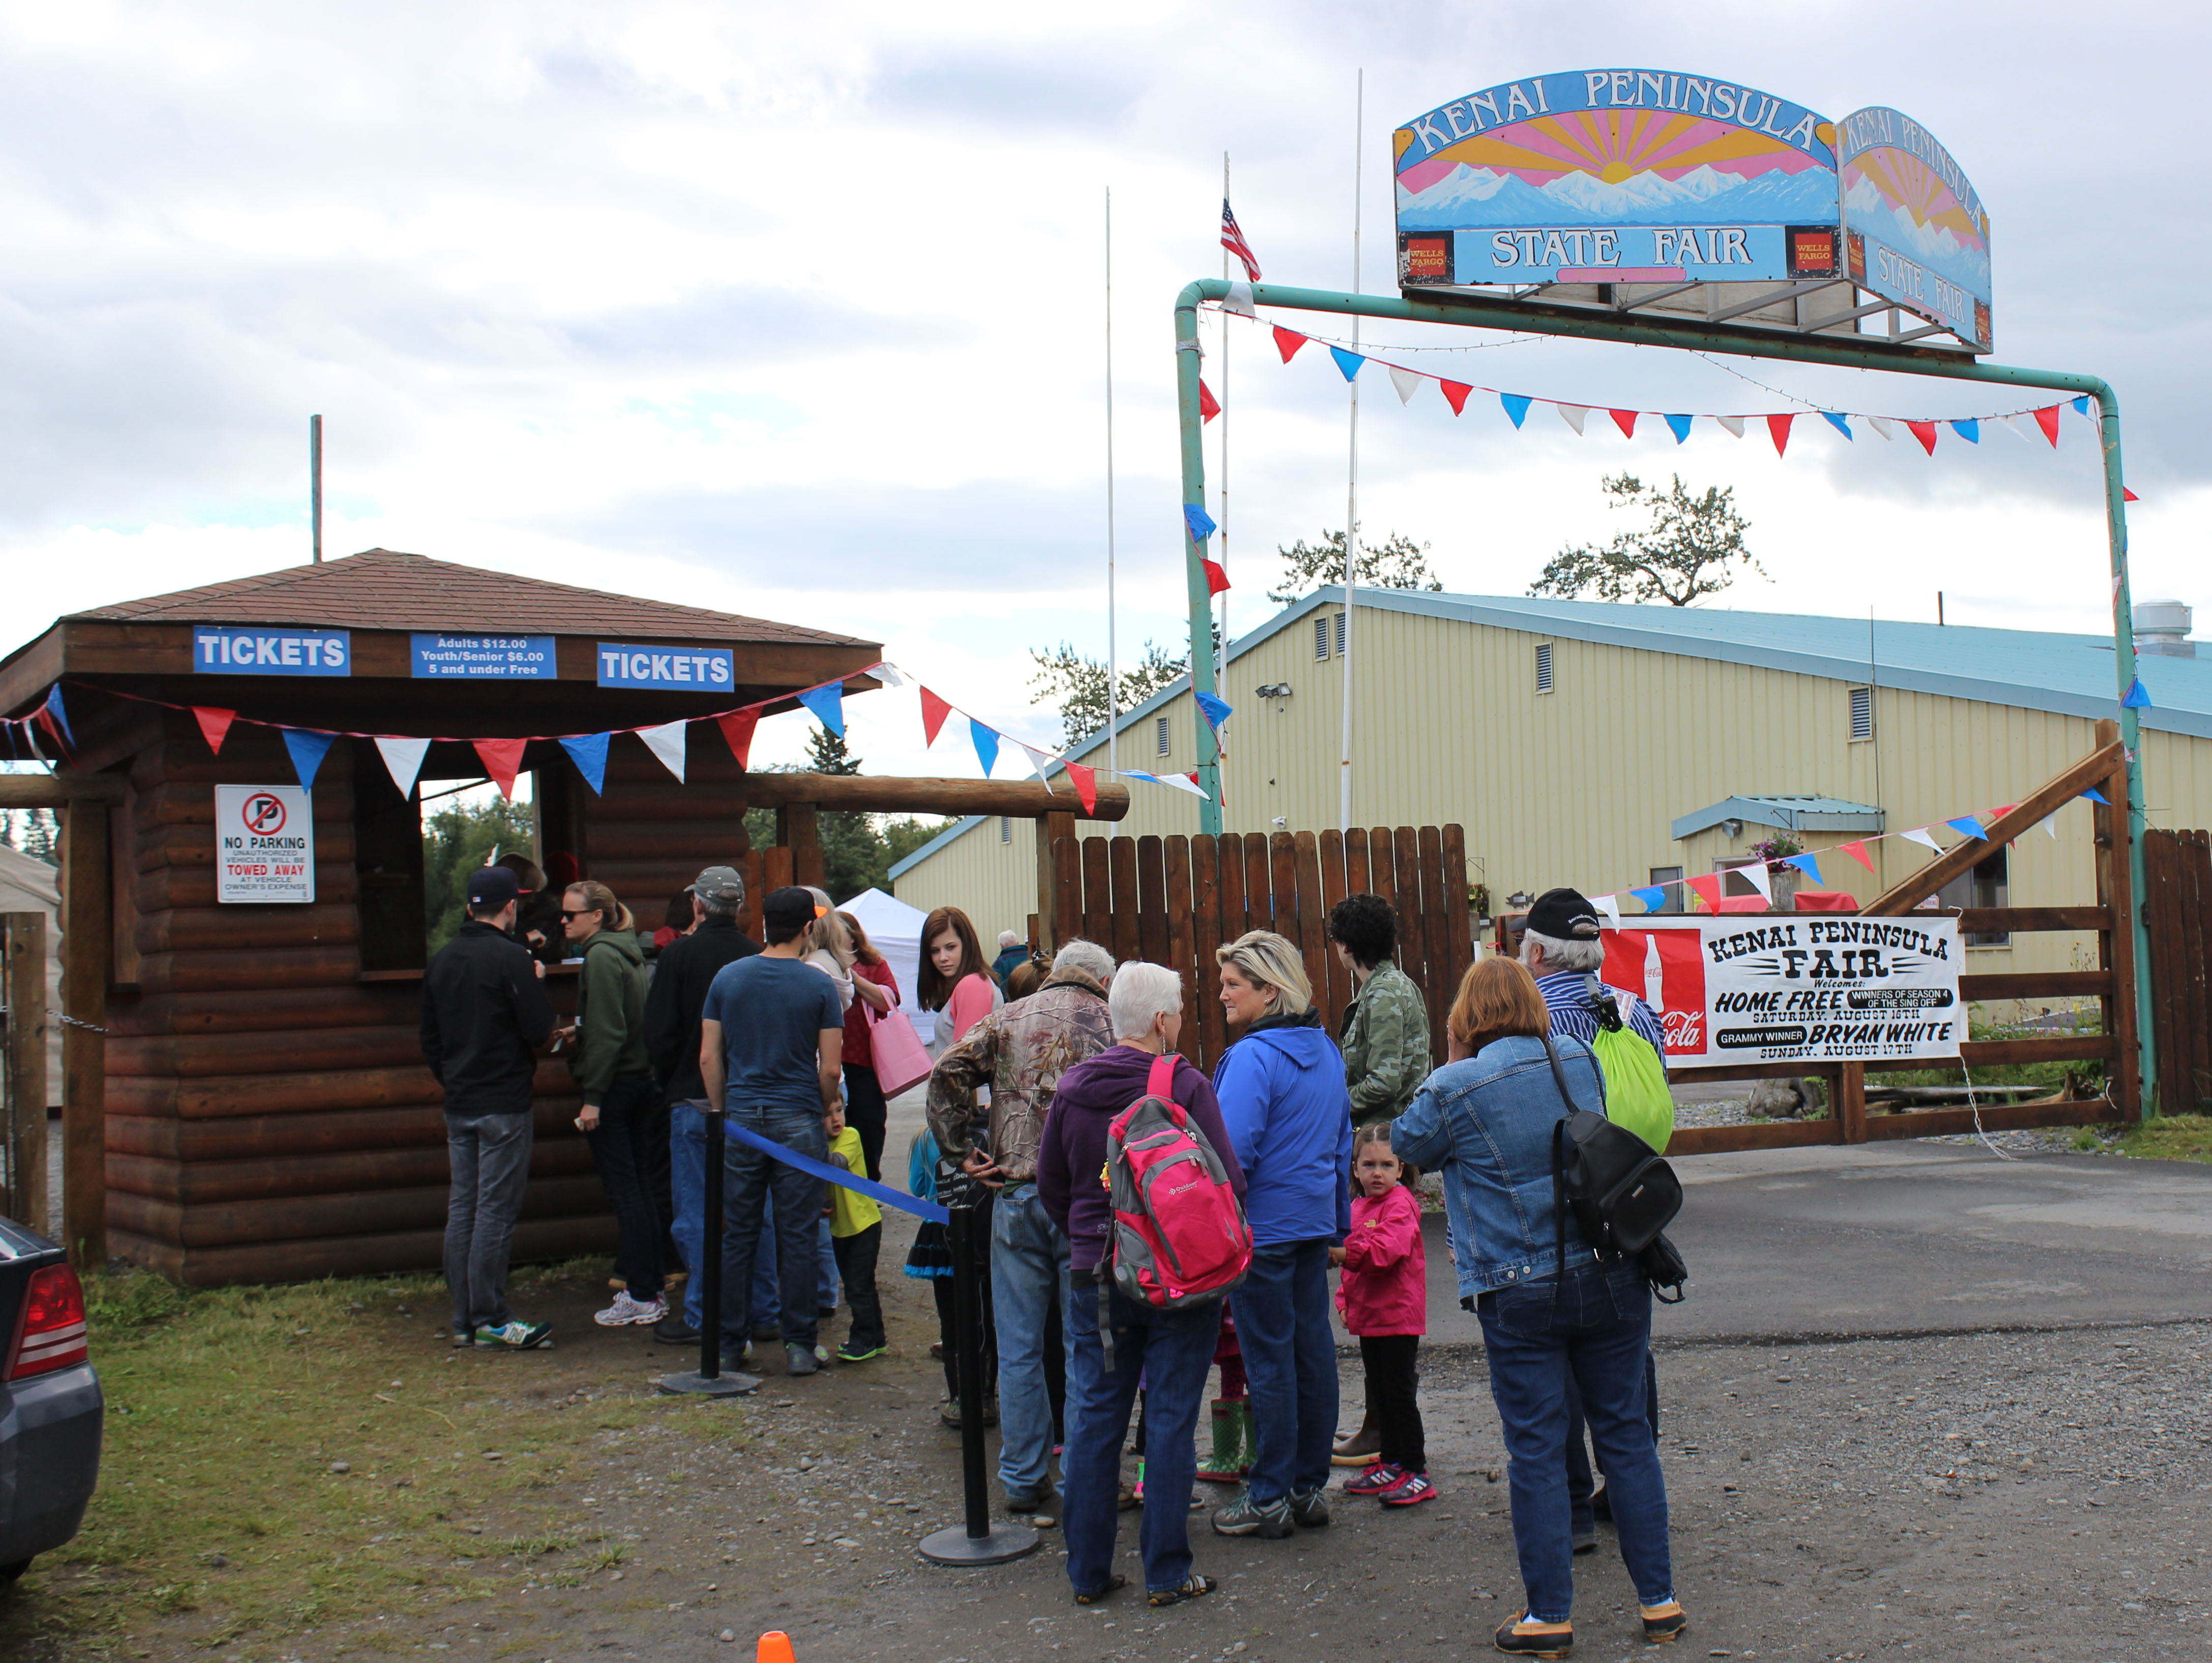 In spite of Saturday morning's rain, visitors lined up at the gate of the Kenai Peninsula Fair. -Photo by McKibben Jackinsky